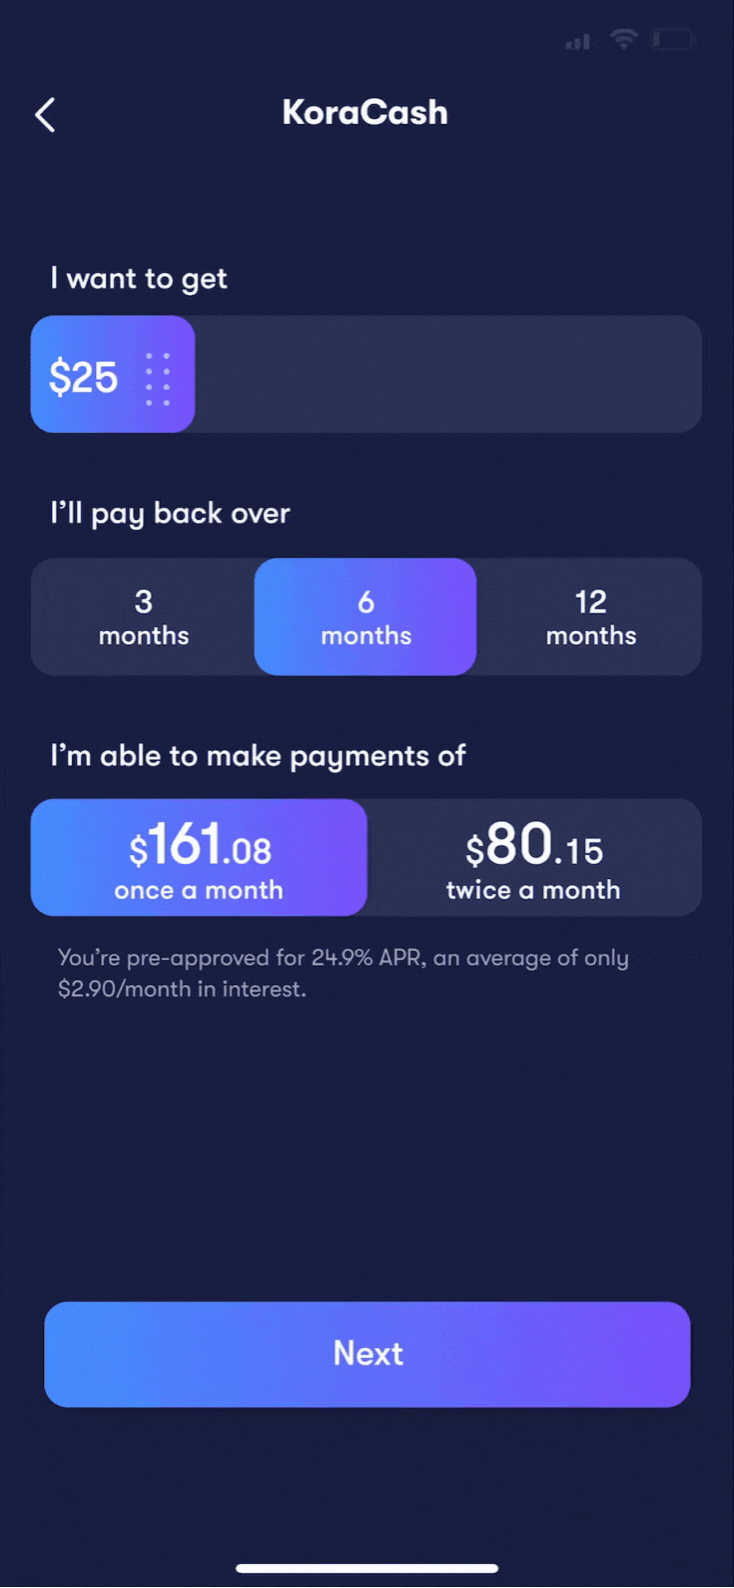 why should I pay twice a month